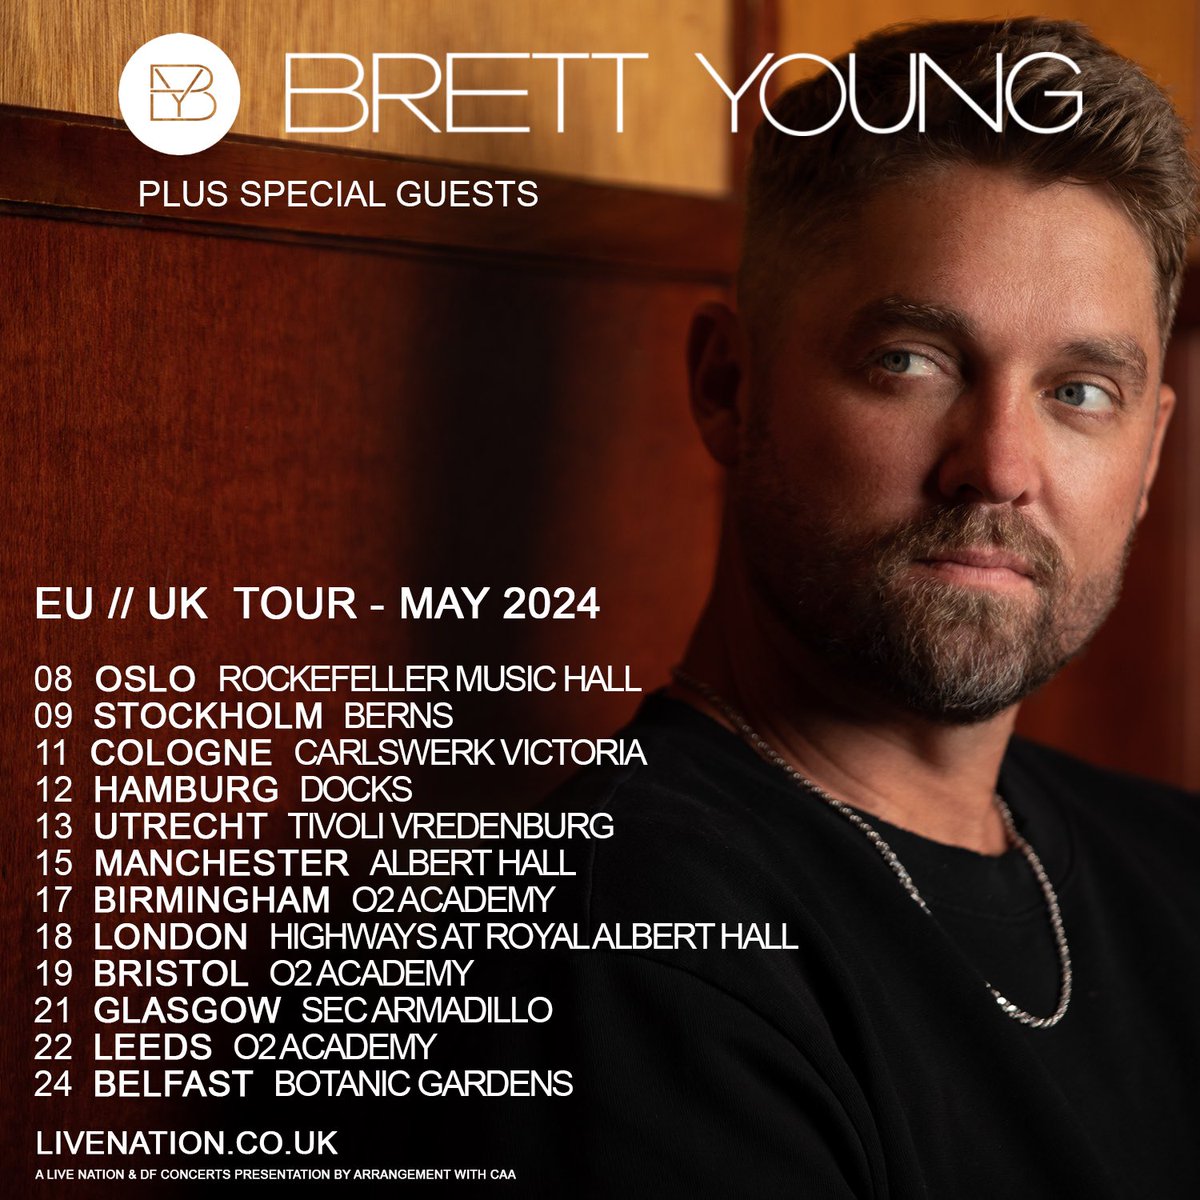 EU // UK Tour tickets on sale at 10AM local time! Get yours here: brettyoungmusic.com/tour/#/